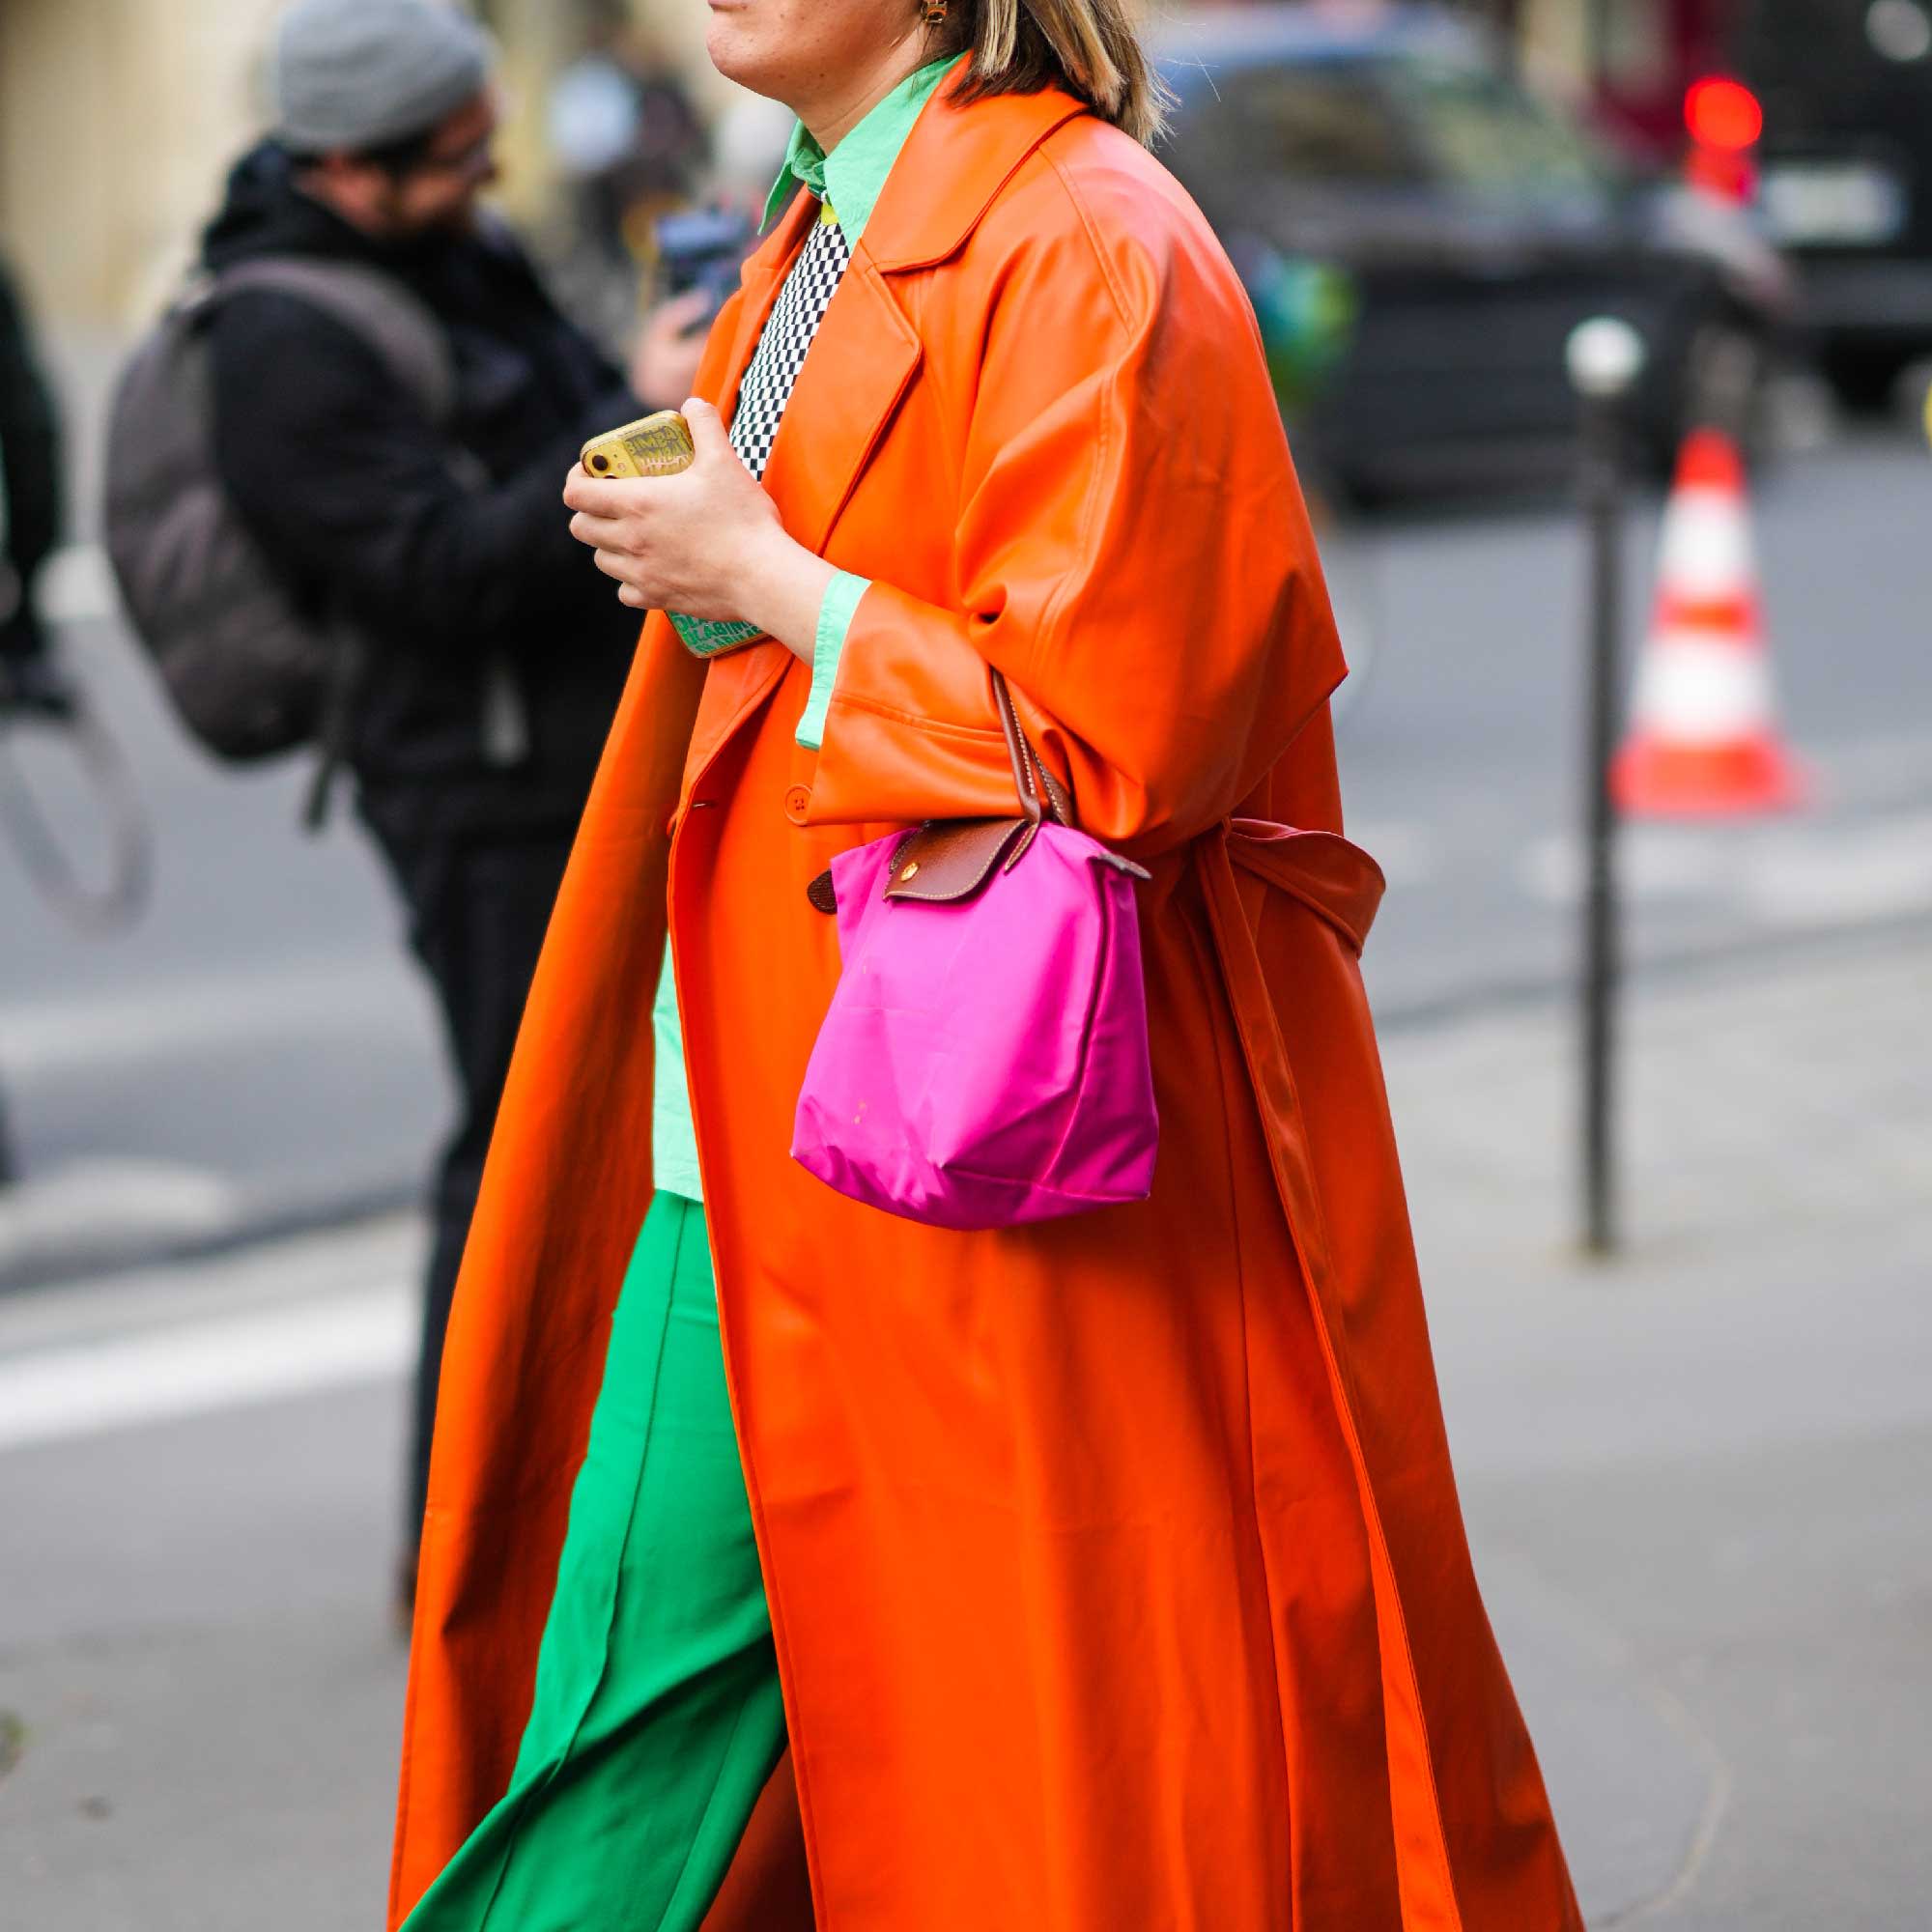 Looking For Your Next Statement Bag? These Designer Buys Are Under $200 ...